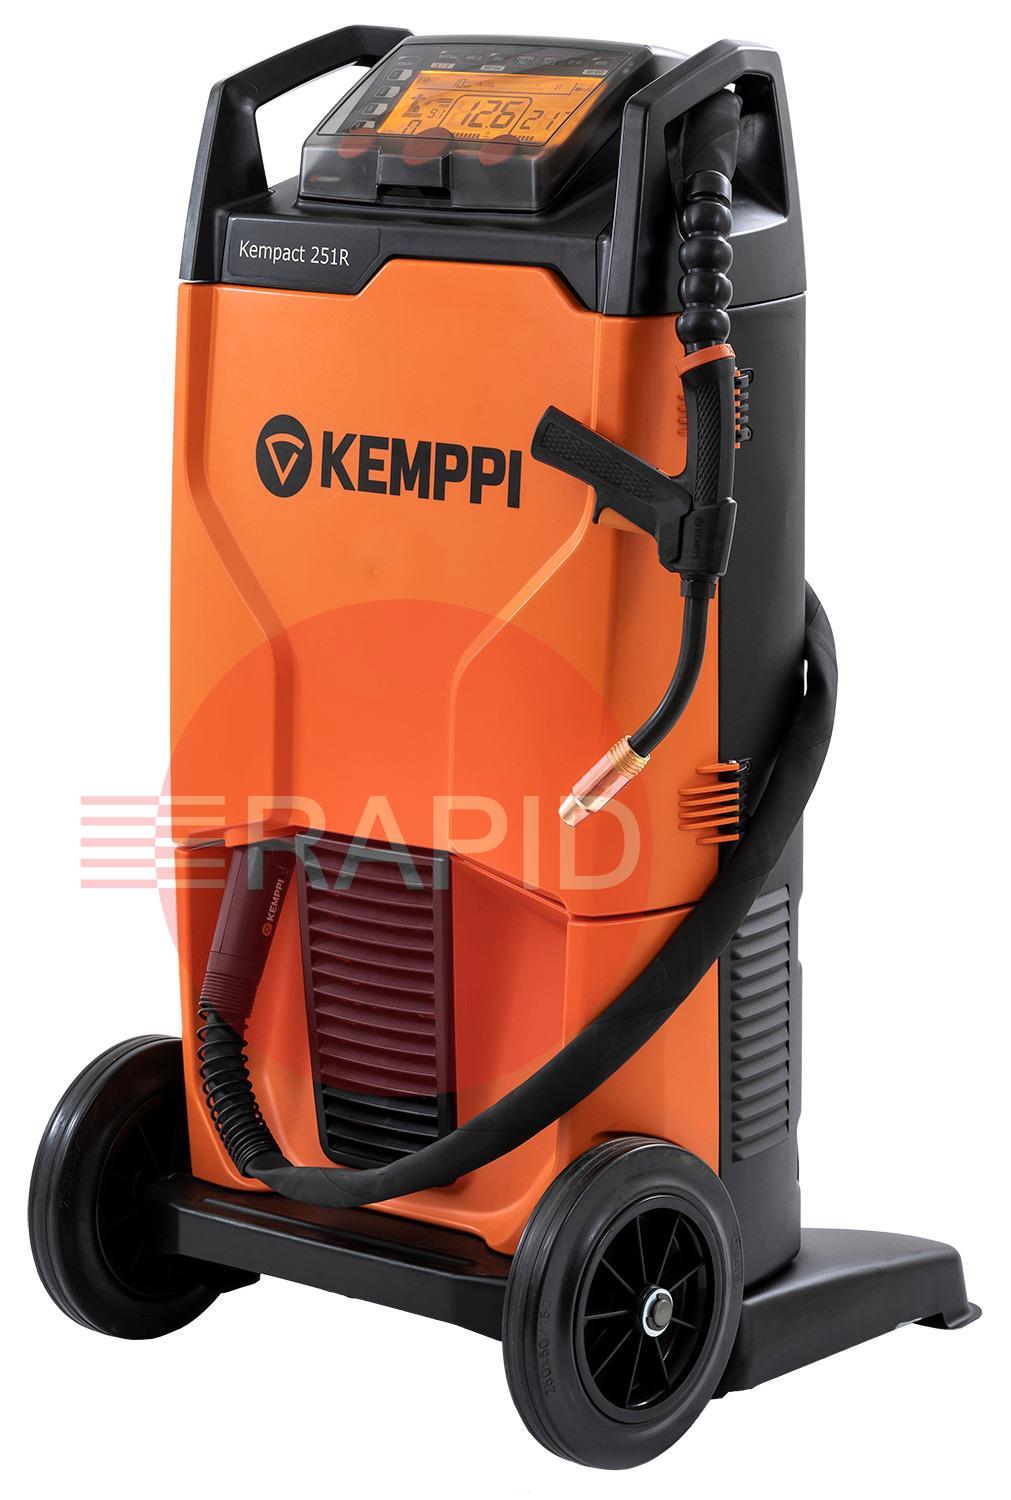 P2304GXE  Kemppi Kempact RA 251R, 250A 1 Phase 230v Mig Welder, with Flexlite GXe 305G 5.0m Torch